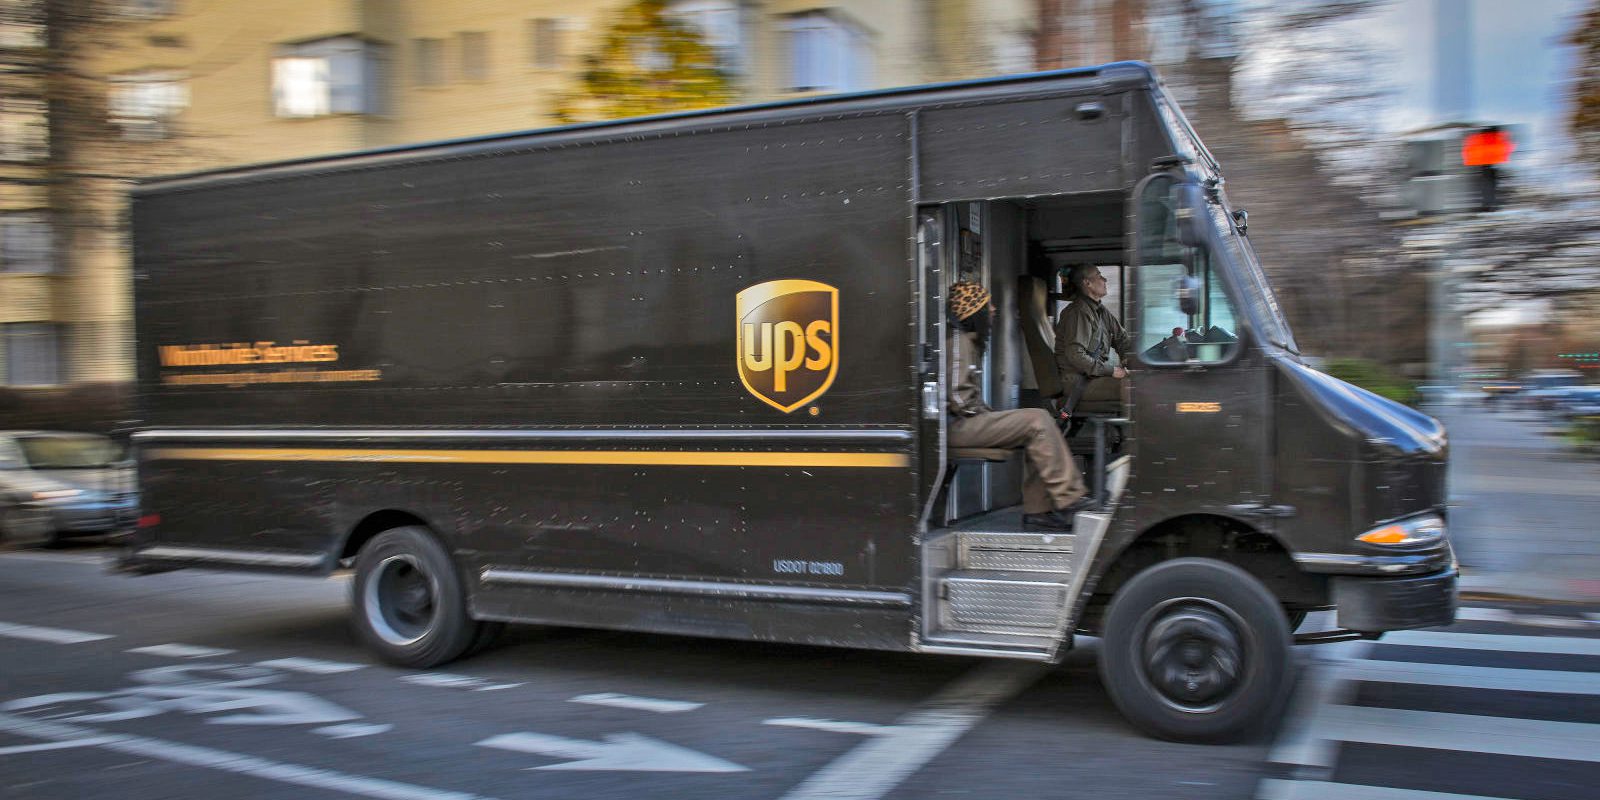 does ups pickup packages